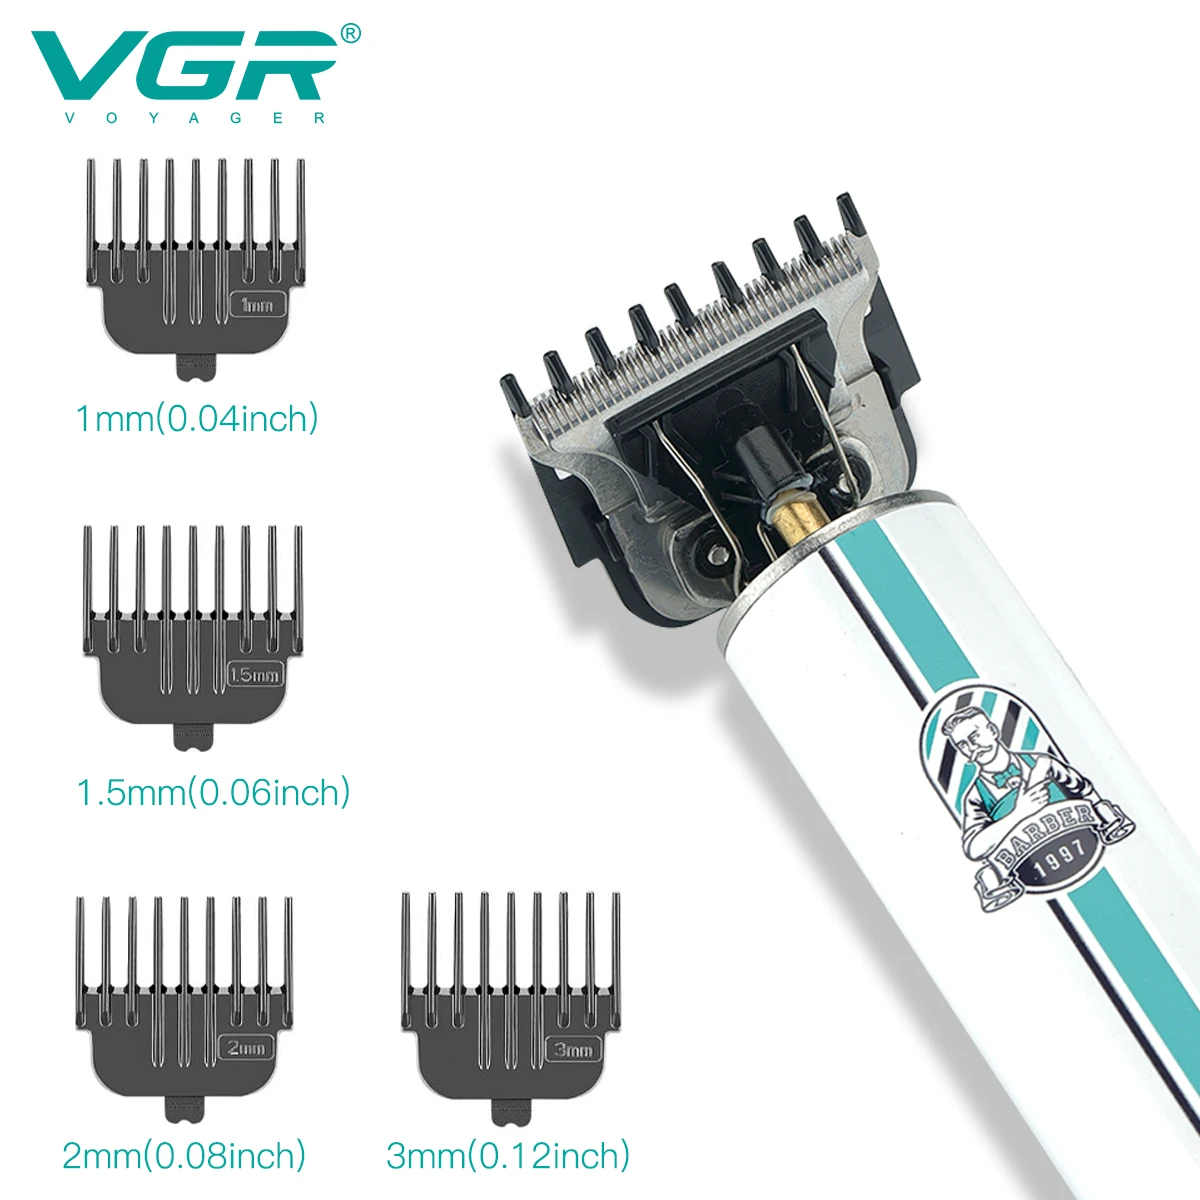 VGR T9 Hair Clipper Professional Hair Cutting Machine Rechargeable Haircut Machine Electric Bald Barber Trimmer for Men V-079 enlarge